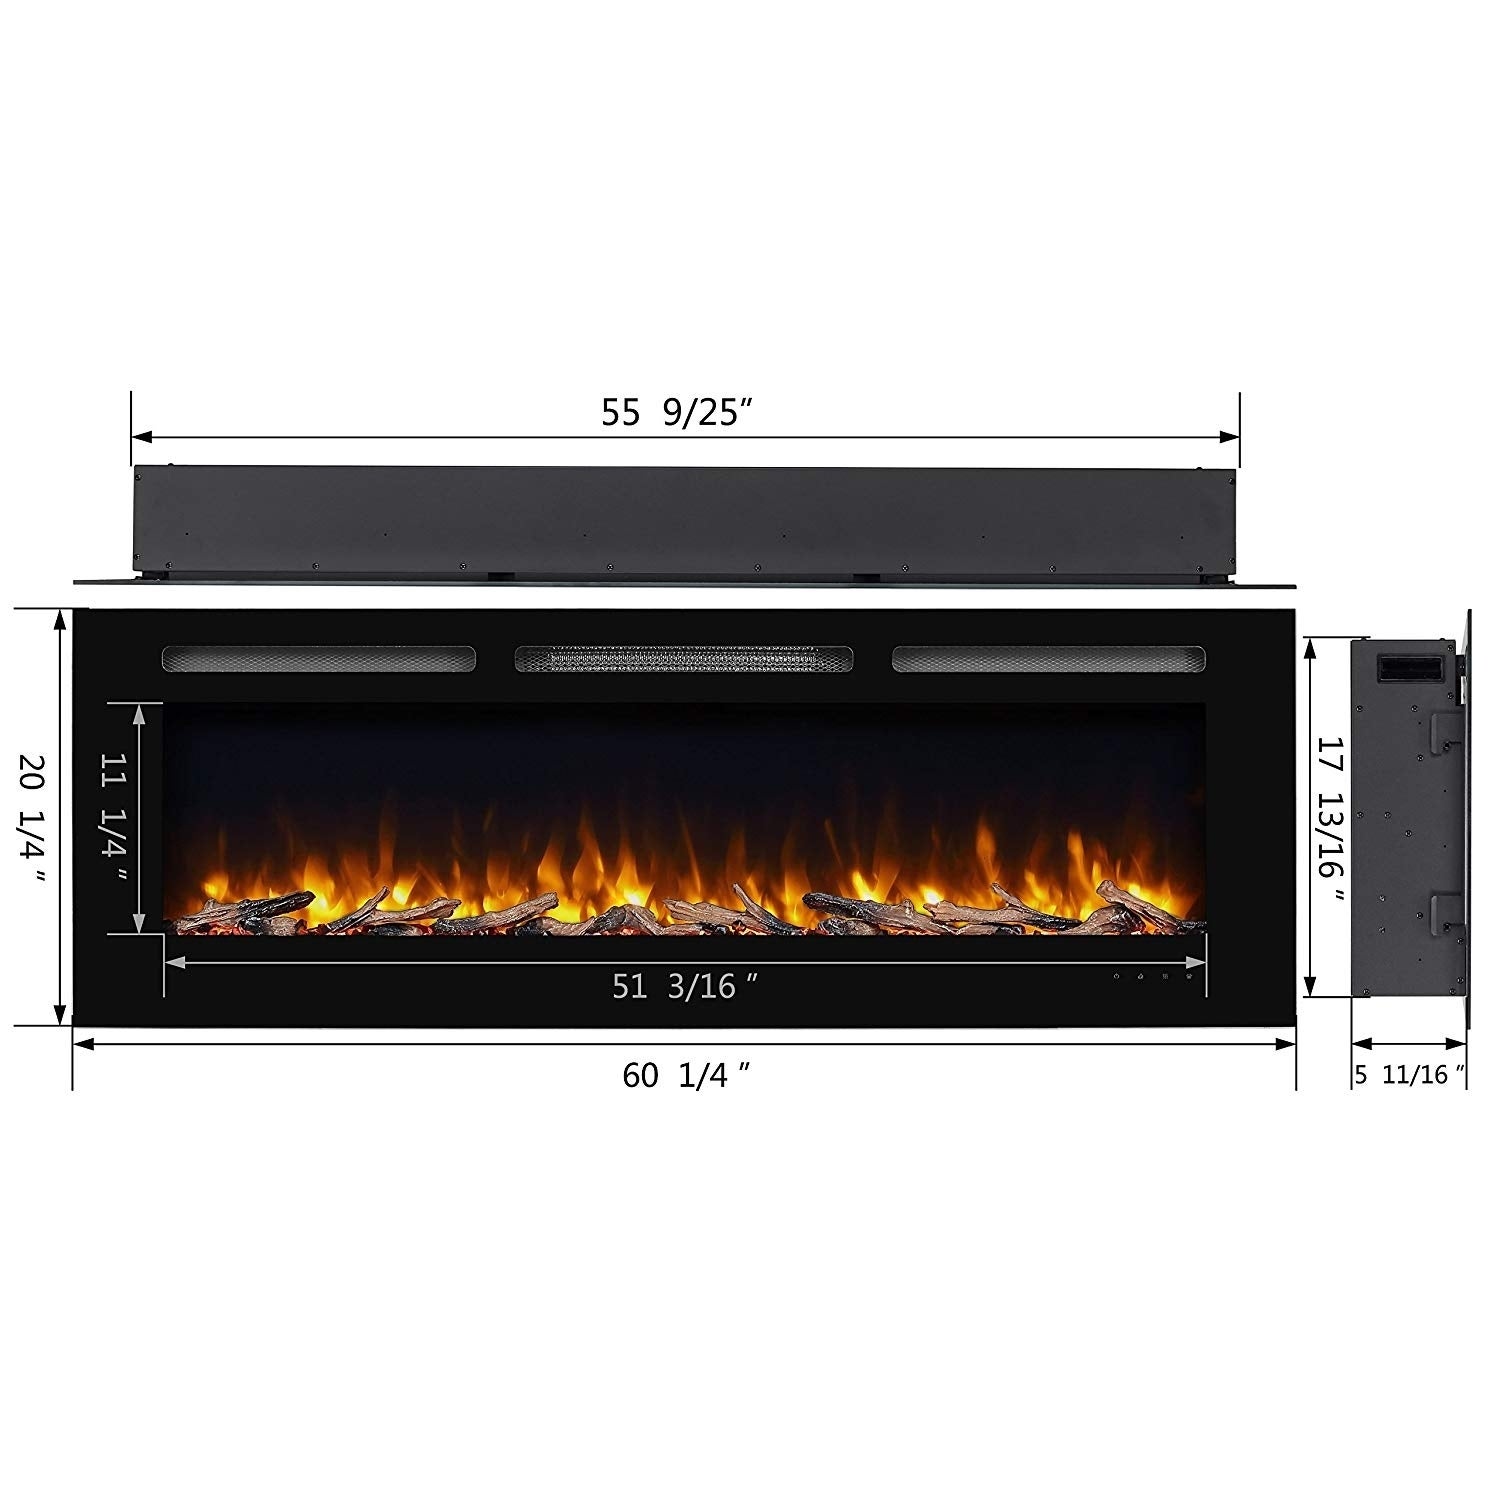 Tv Above Electric Fireplace Unique 60" Alice In Wall Recessed Electric Fireplace 1500w Black